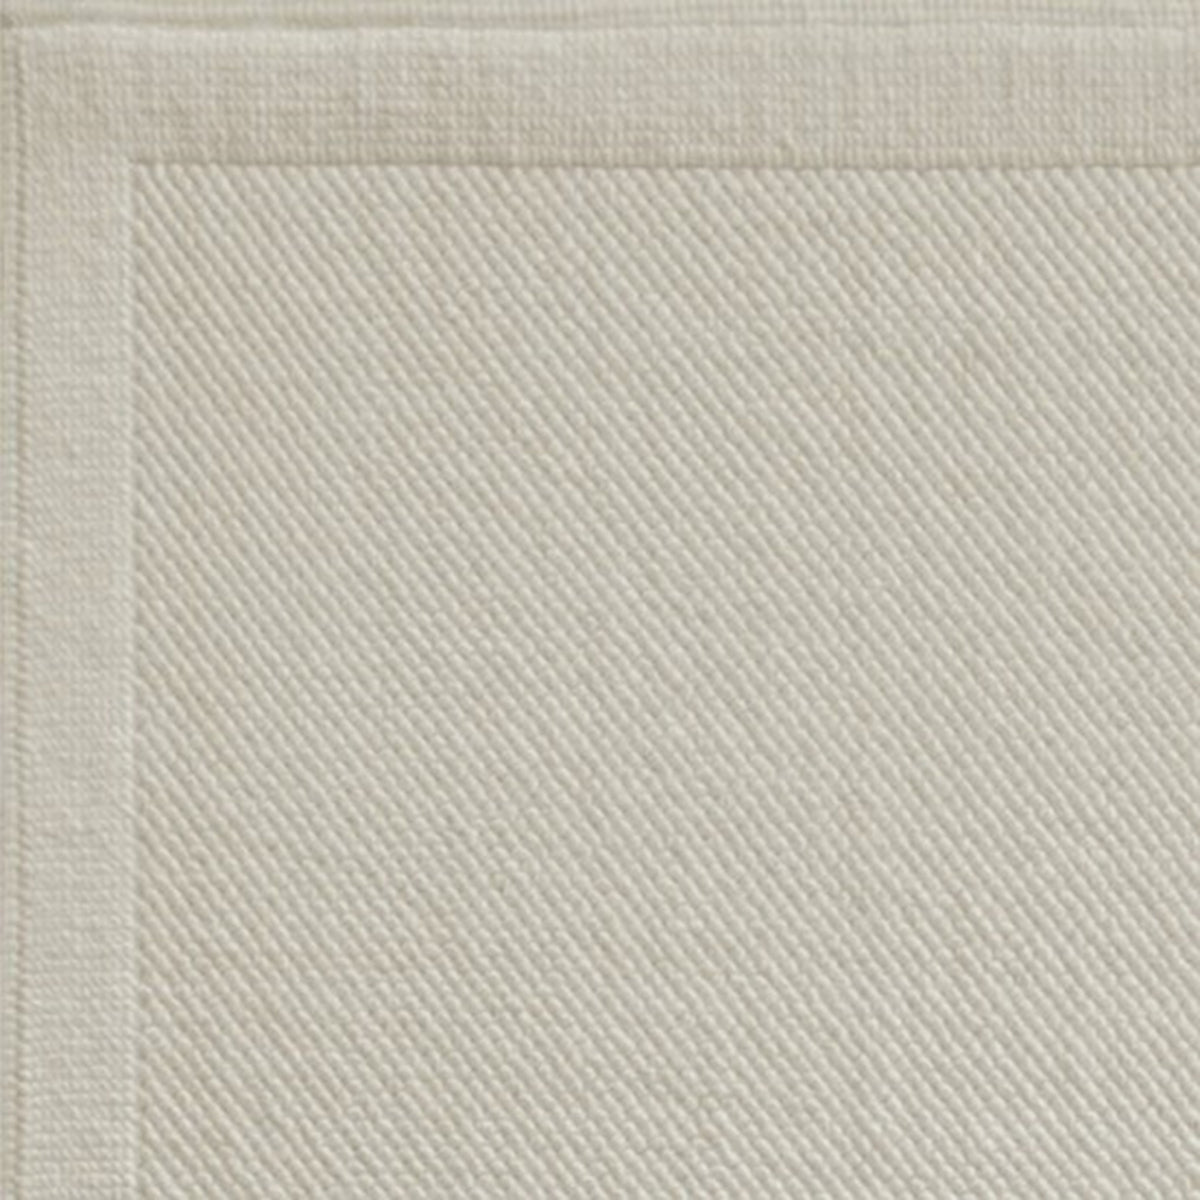 Swatch Sample of Graccioza Pearls Bath Towels and Rugs in Color Fog